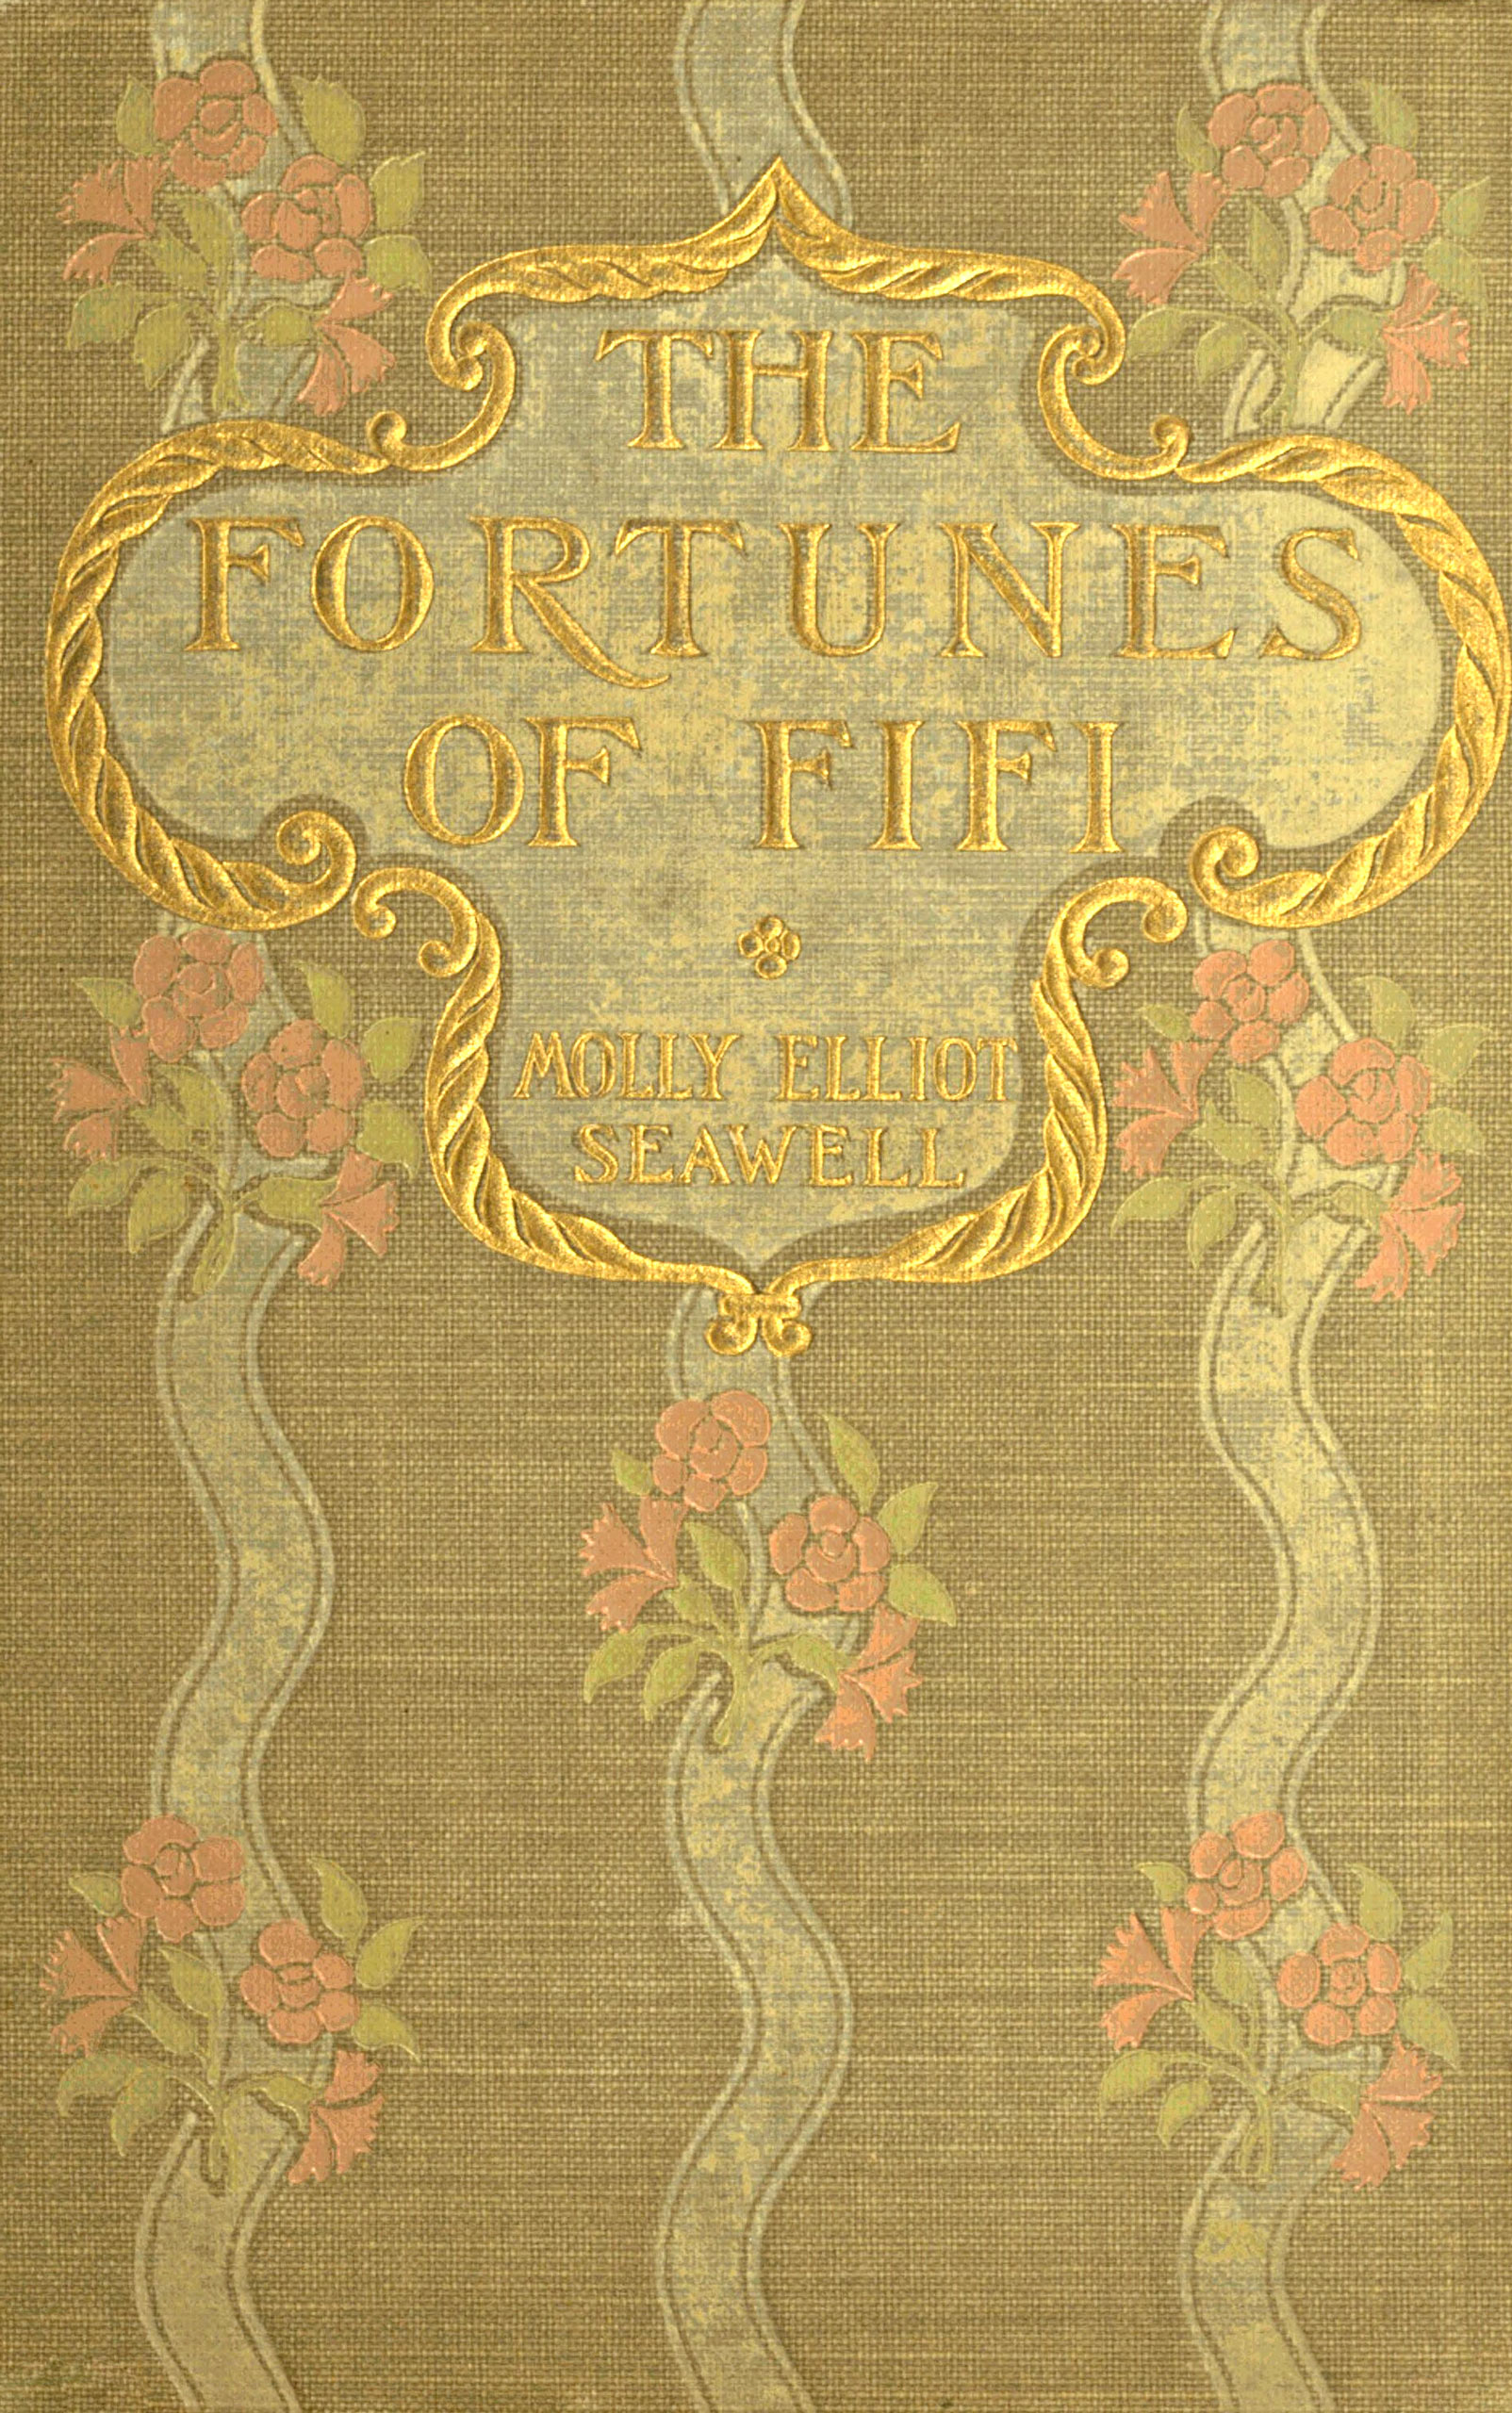 The Fortunes of Fifi, by Molly Elliot Seawell—A Project Gutenberg eBook